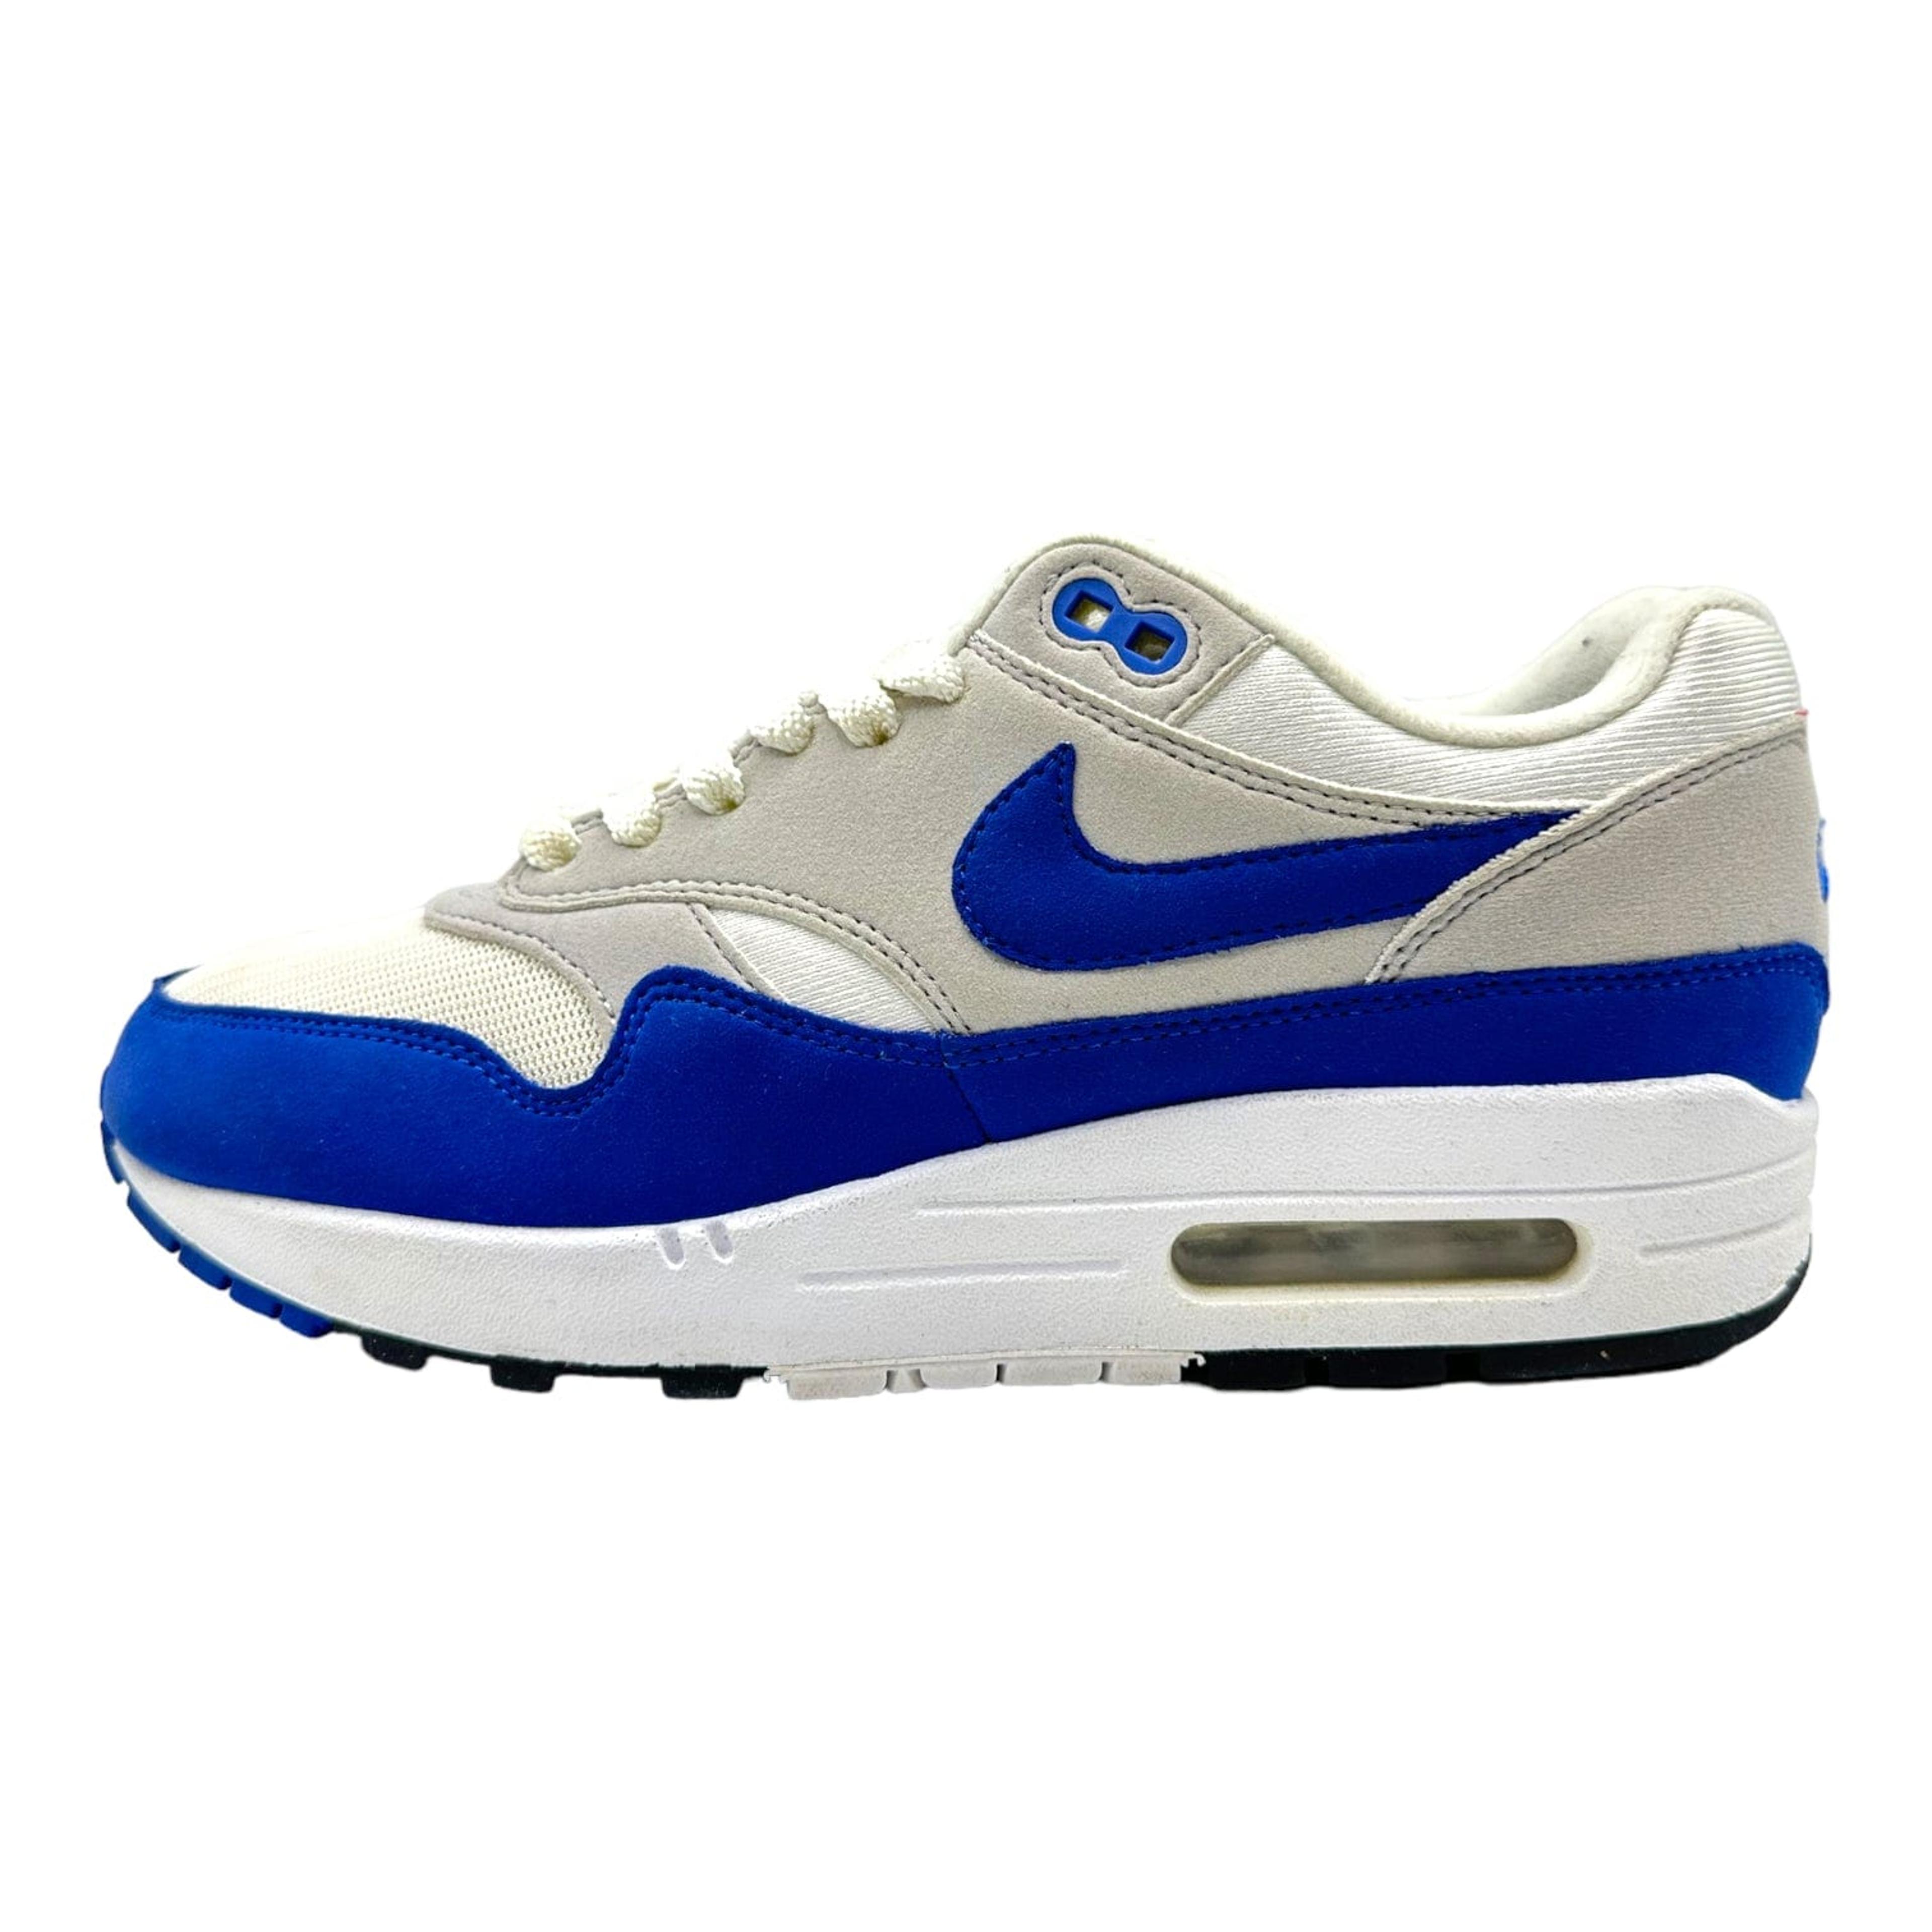 Alternate View 1 of Nike Air Max 1 Anniversary Royal (2017) Pre-Owned